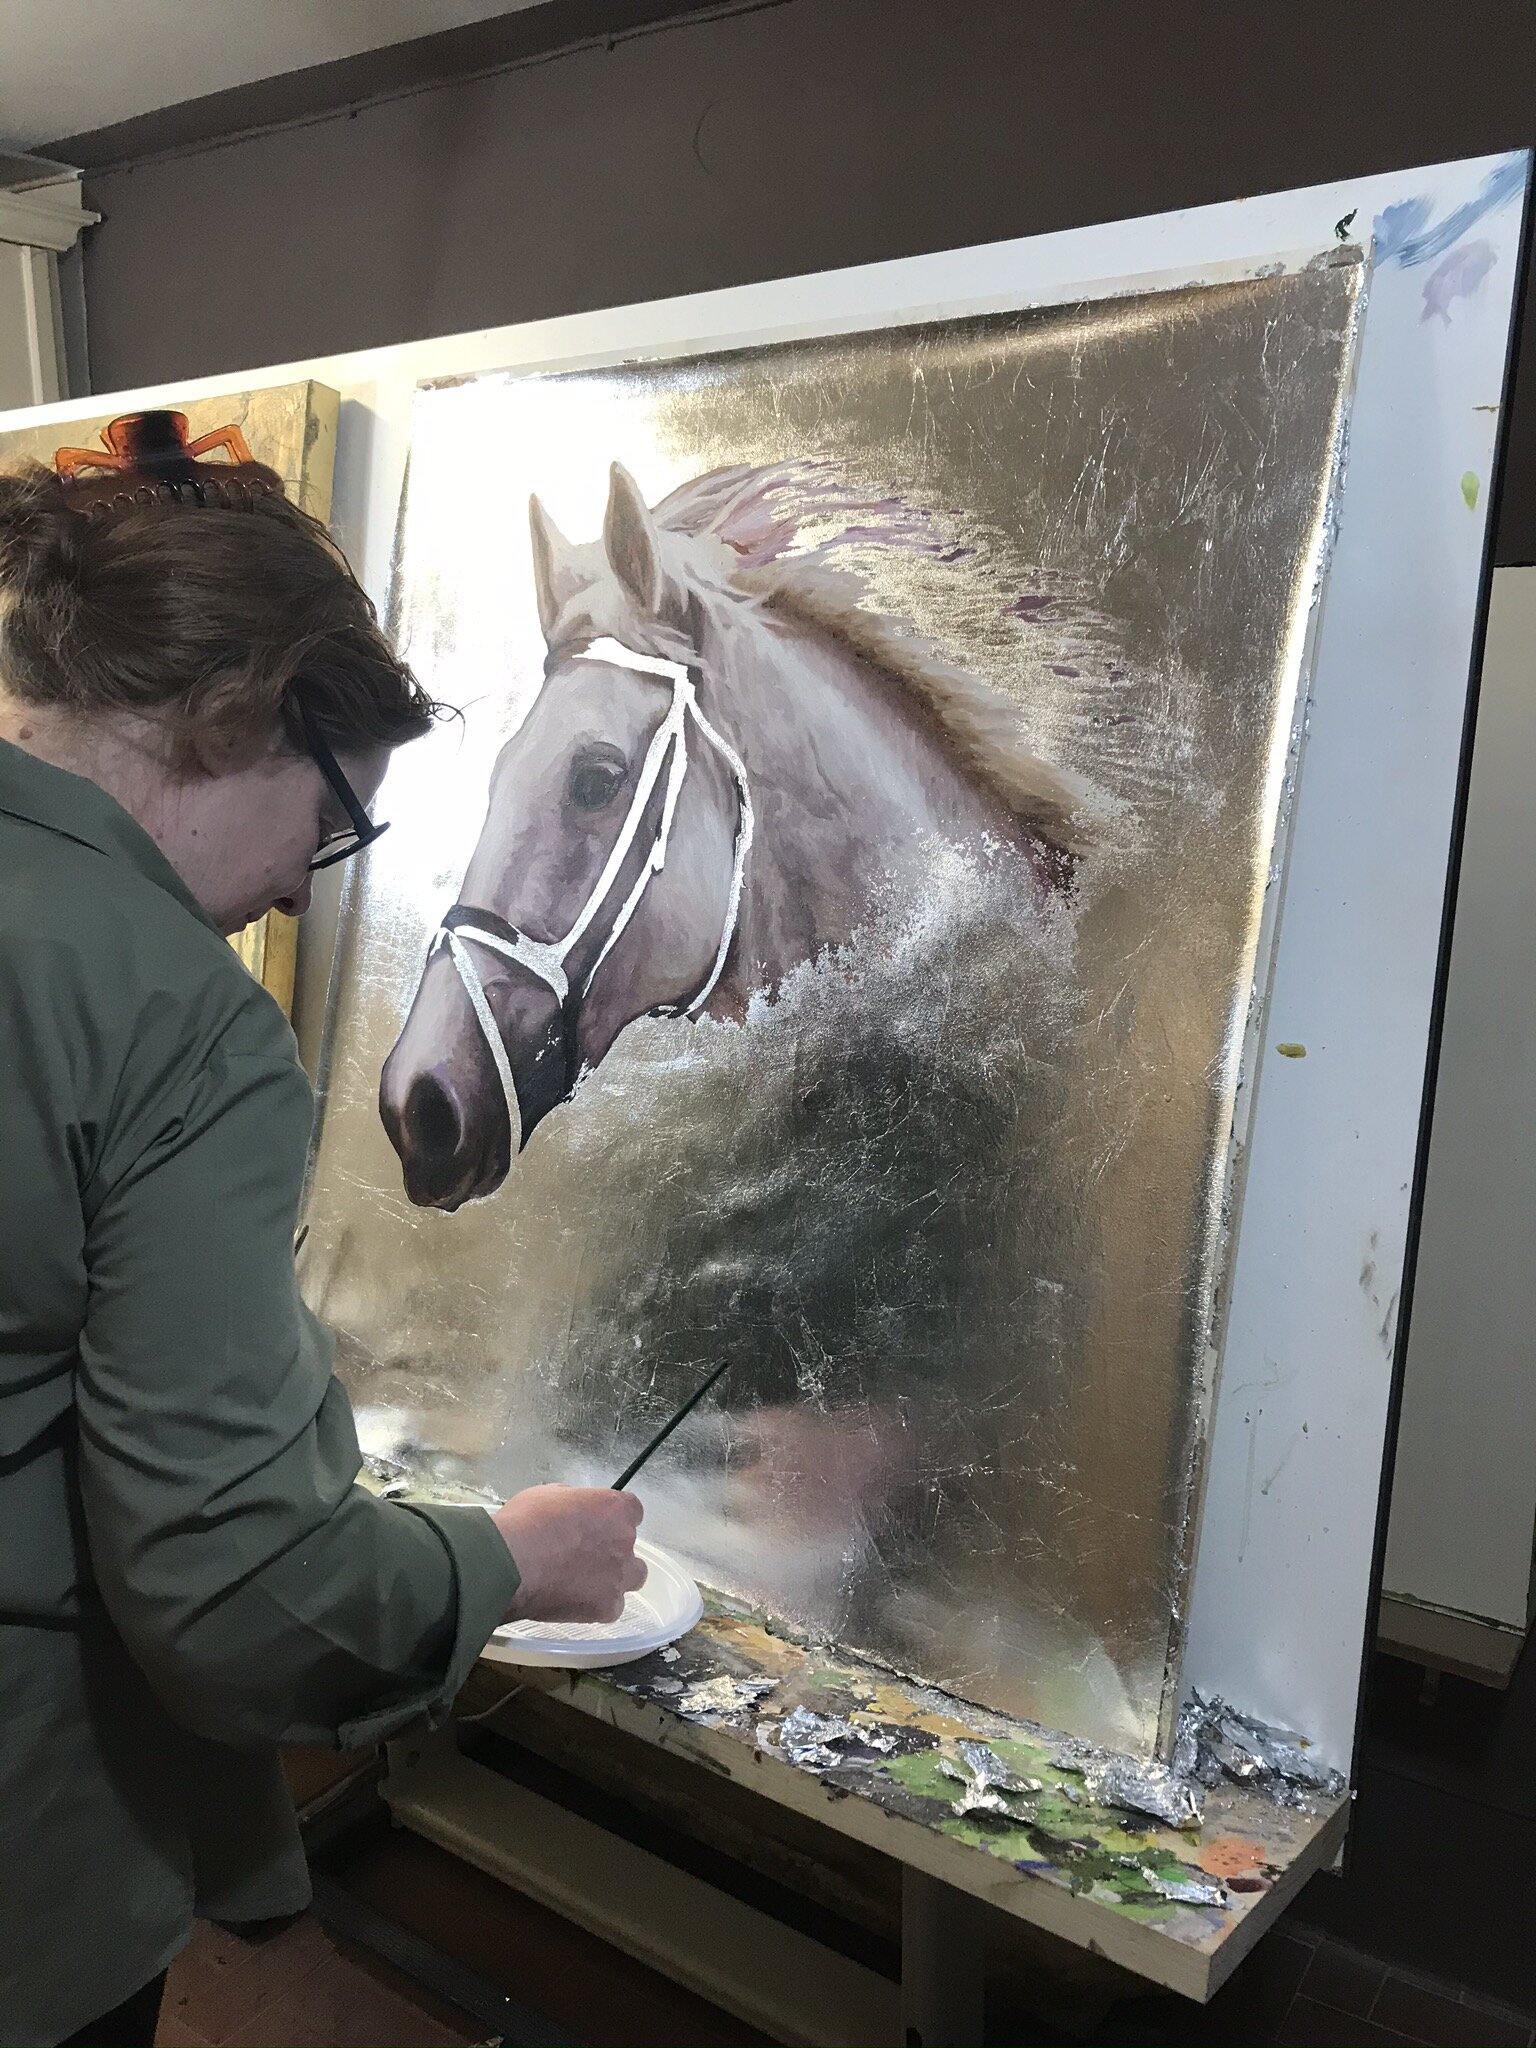 PICTURED: Sandra Petreni applies the finishing touches to a commissioned painting. She told me that riders often ask for portraits of photographs of their horses due to Sandra’s excellence at ultra-realistic recreations.